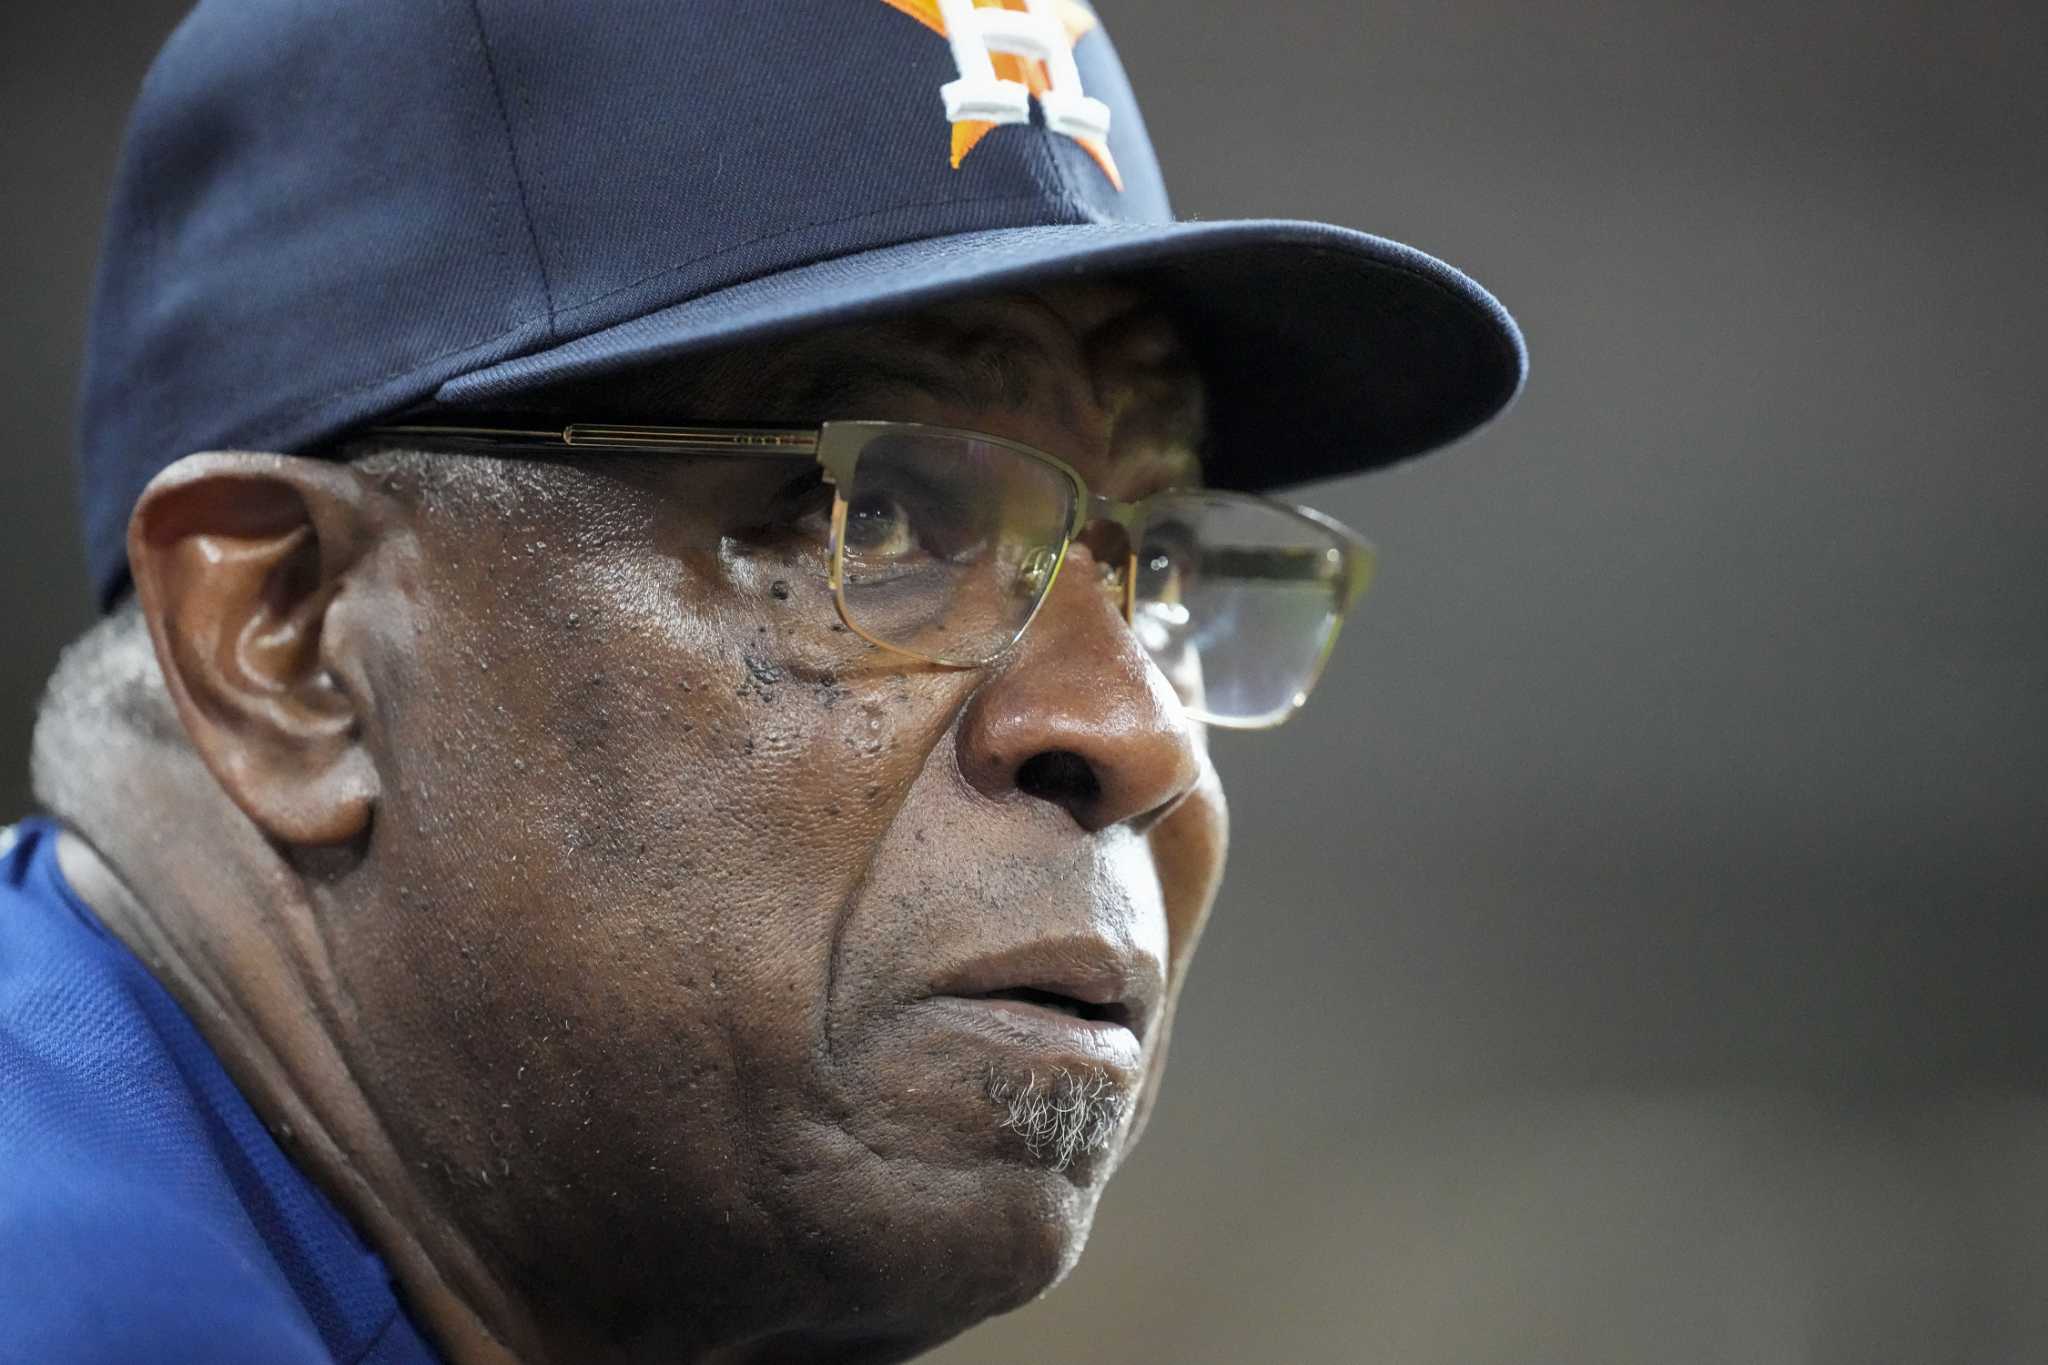 Dusty Baker close to deal to become Astros manager - Los Angeles Times